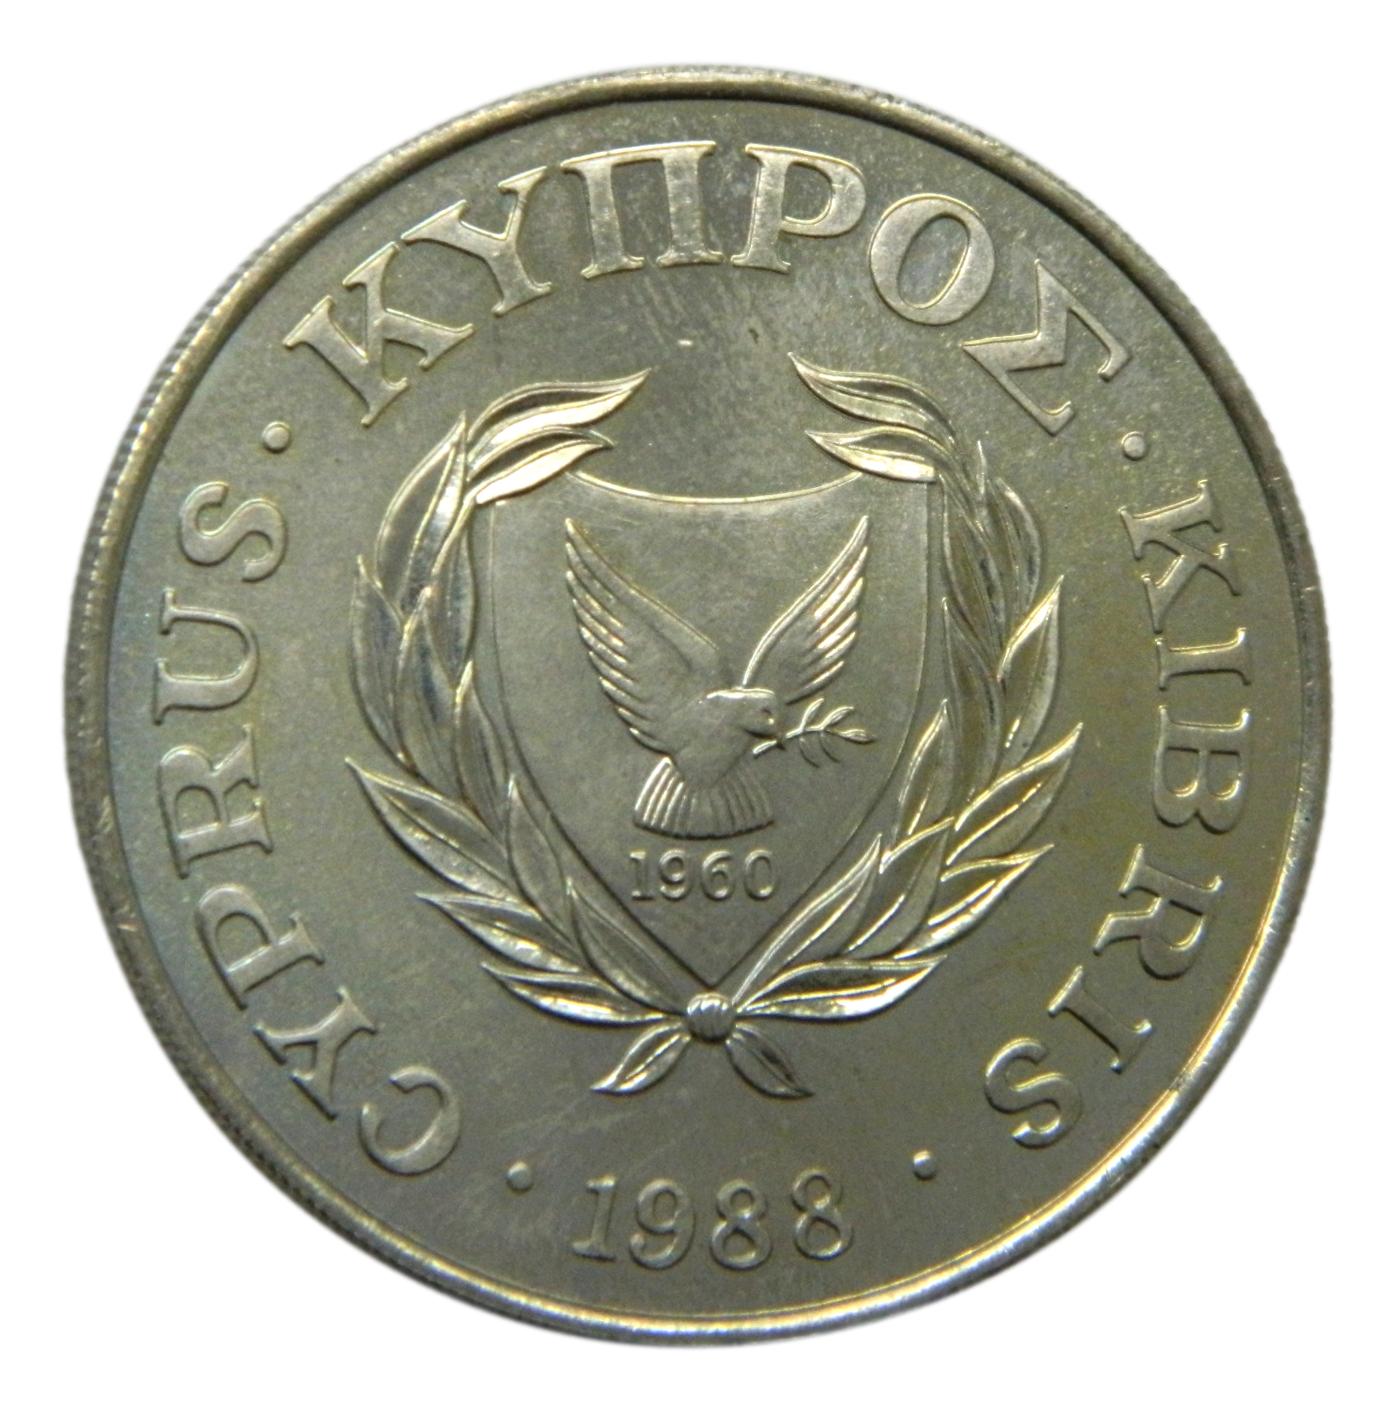 1981 ND - CHIPRE - 500 MILS - PROOF - S6